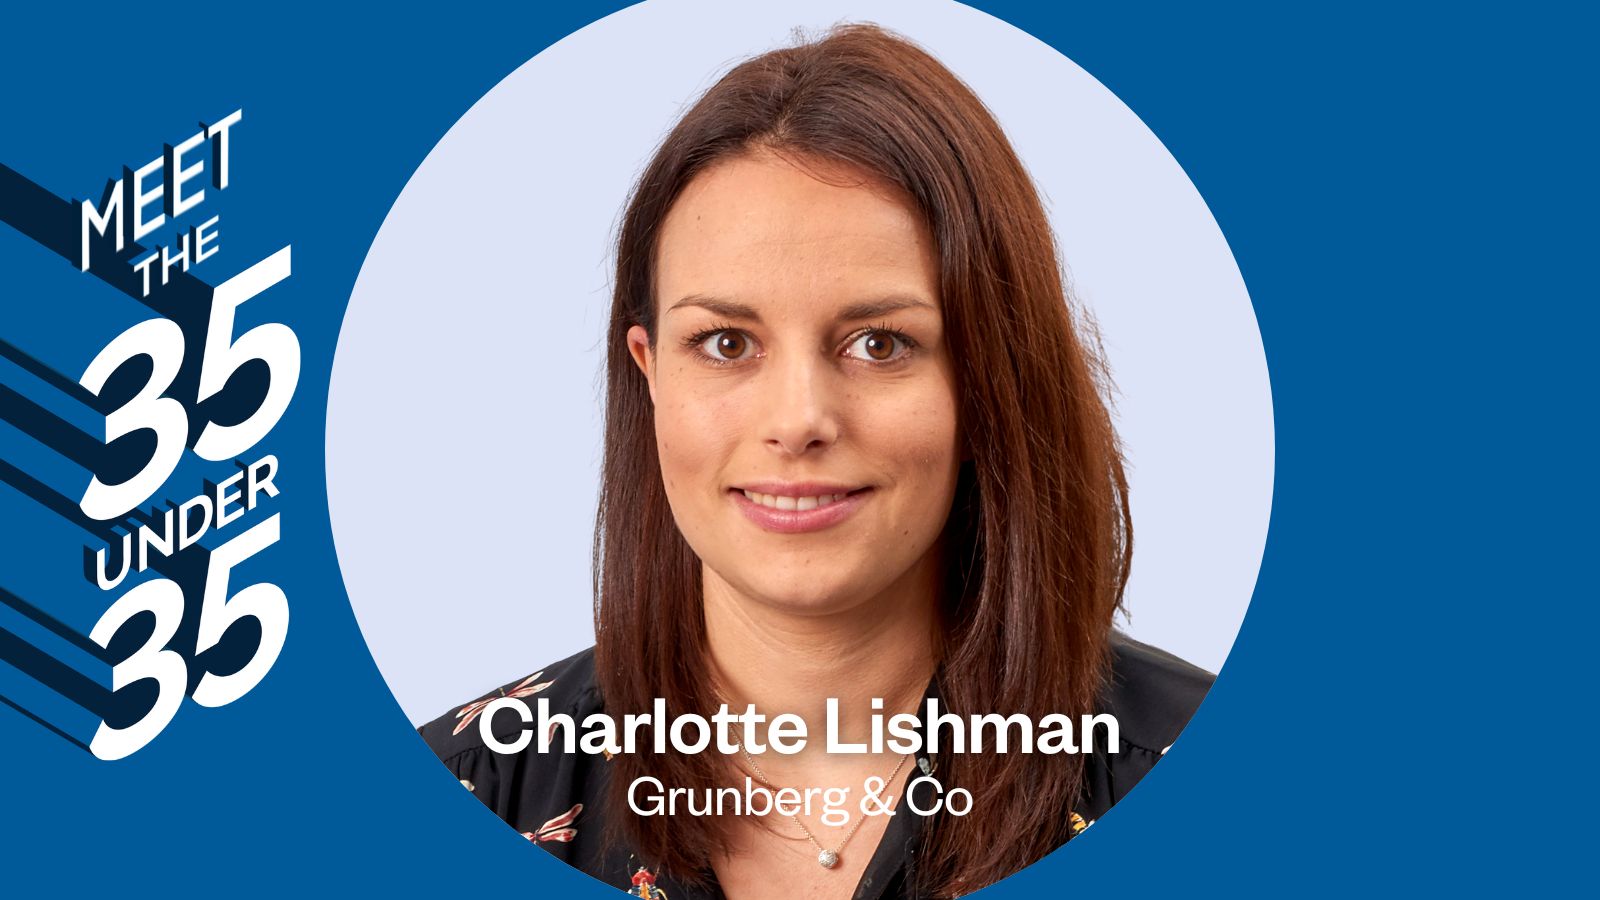 Meet the 35 Under 35 Q&A with Charlotte Lishman from Grunberg & Co